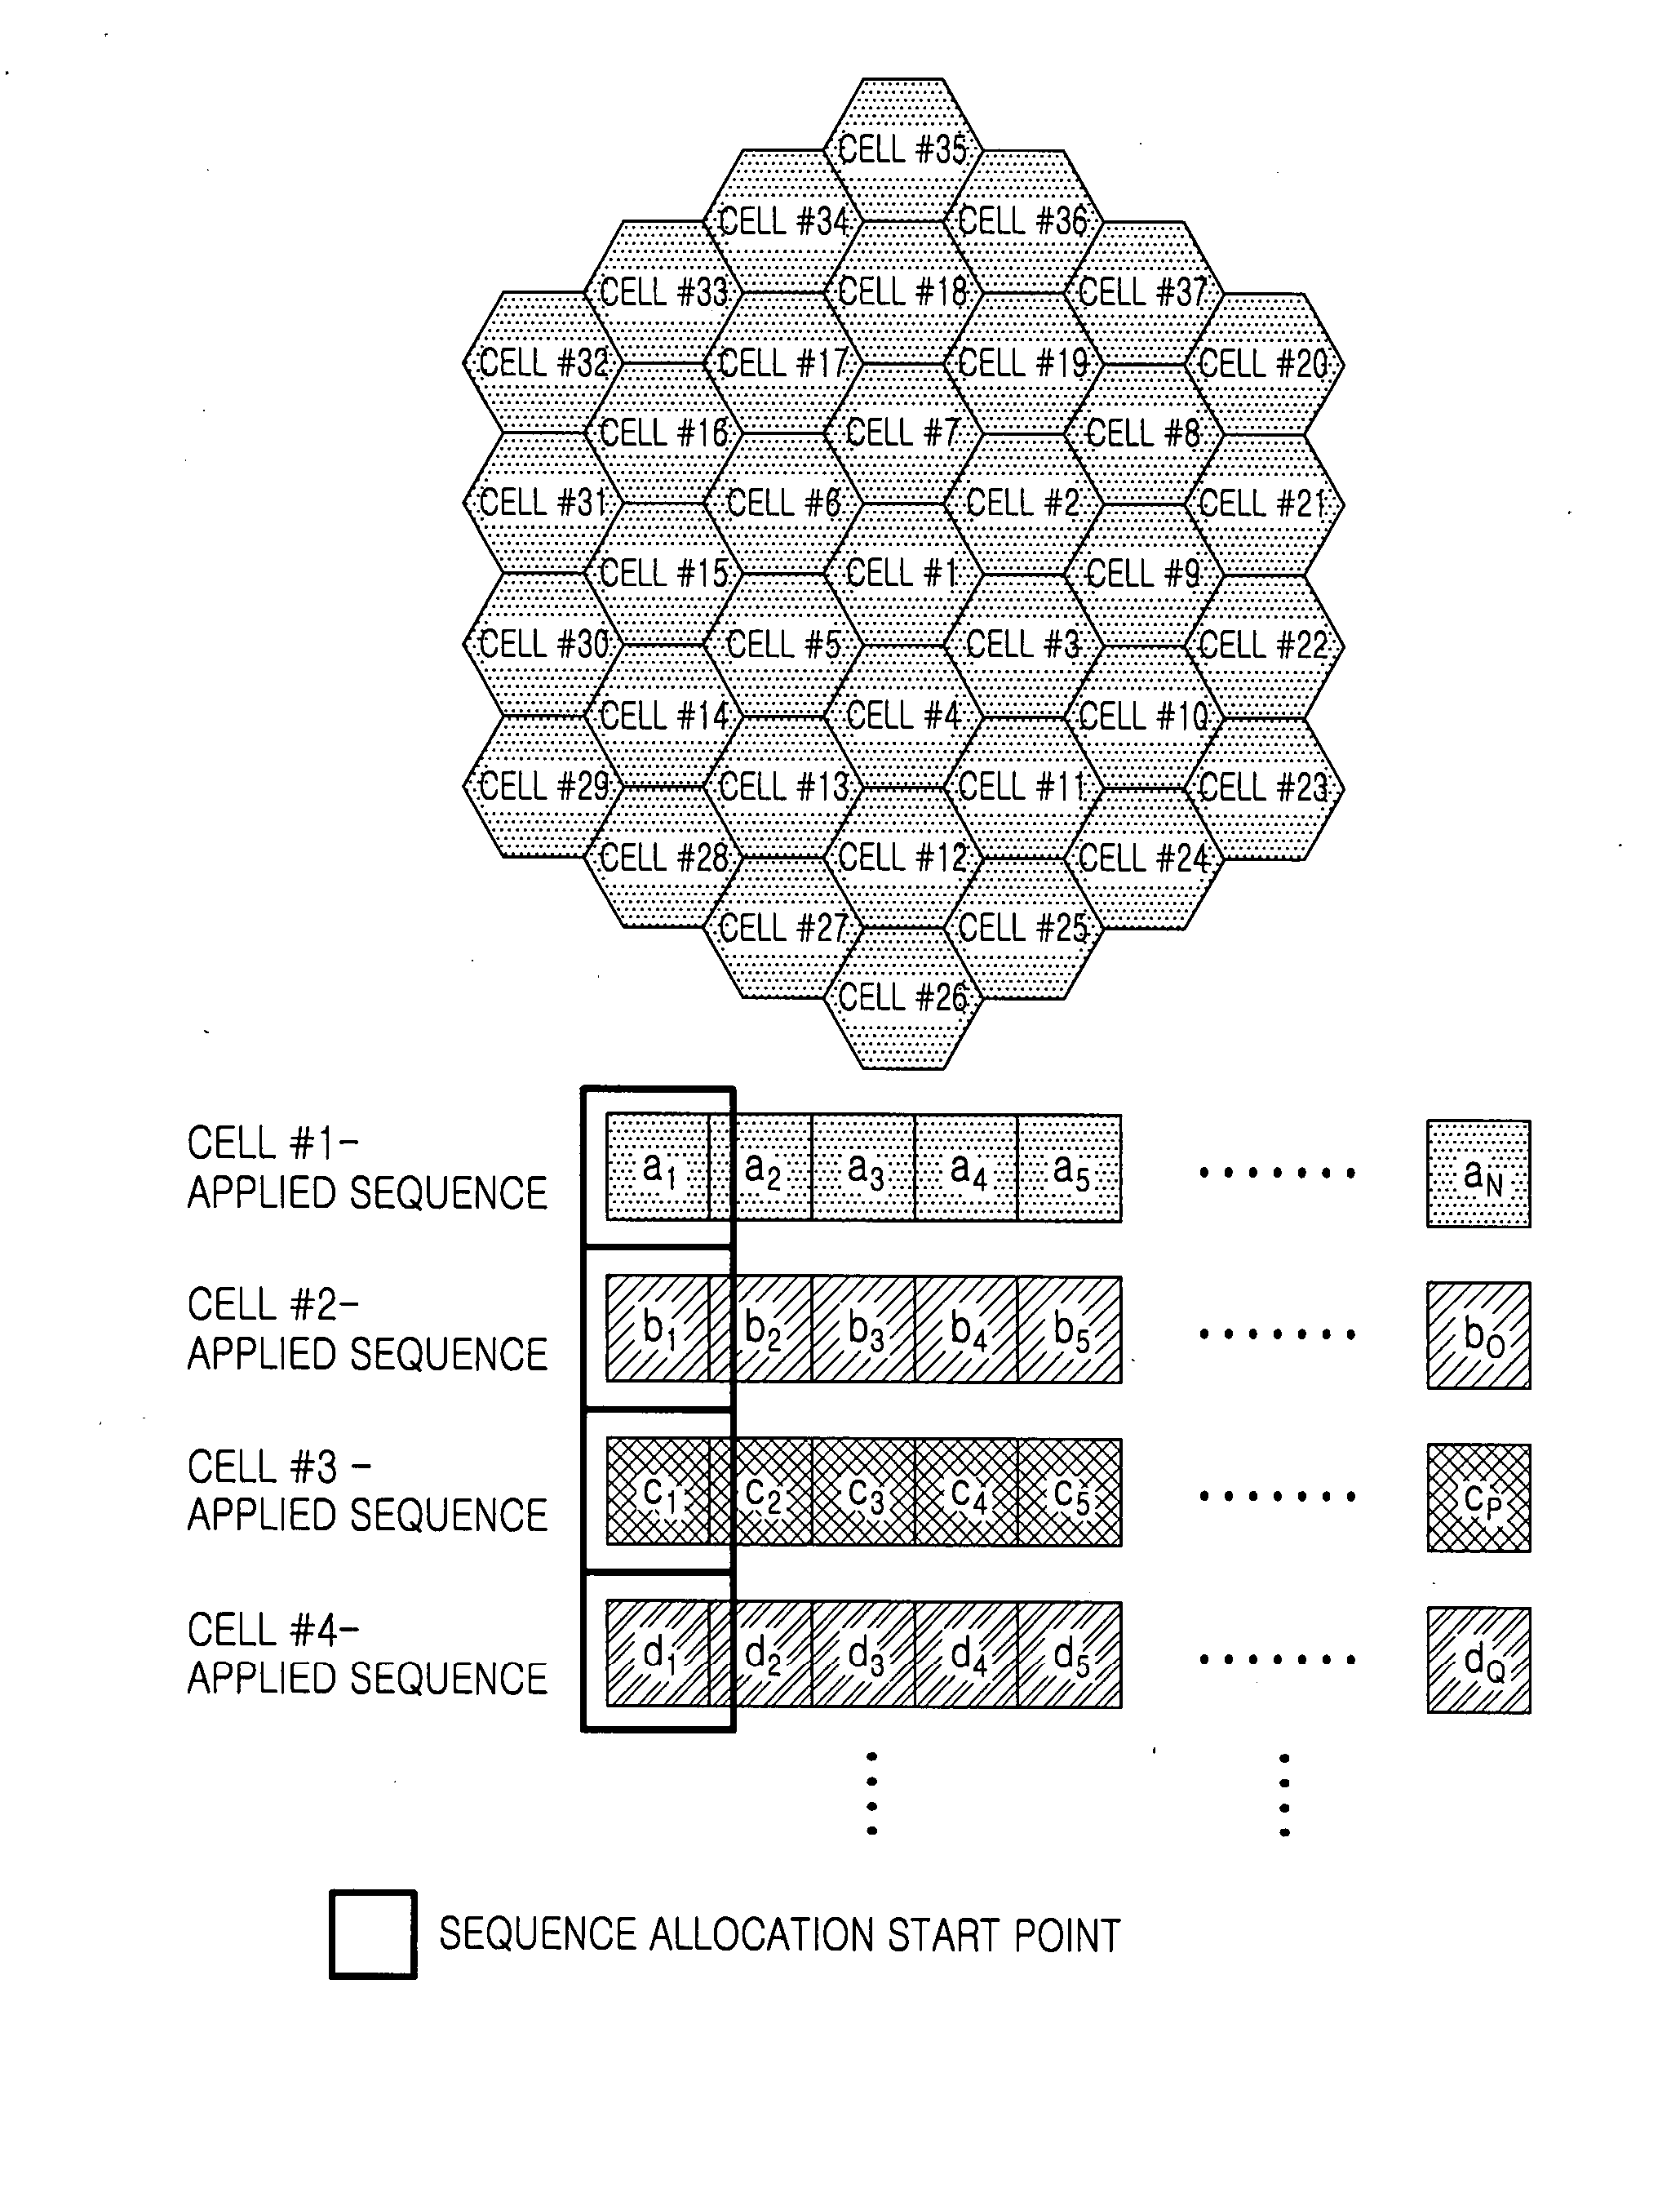 Method and system for using resources in a multi-cell communication system